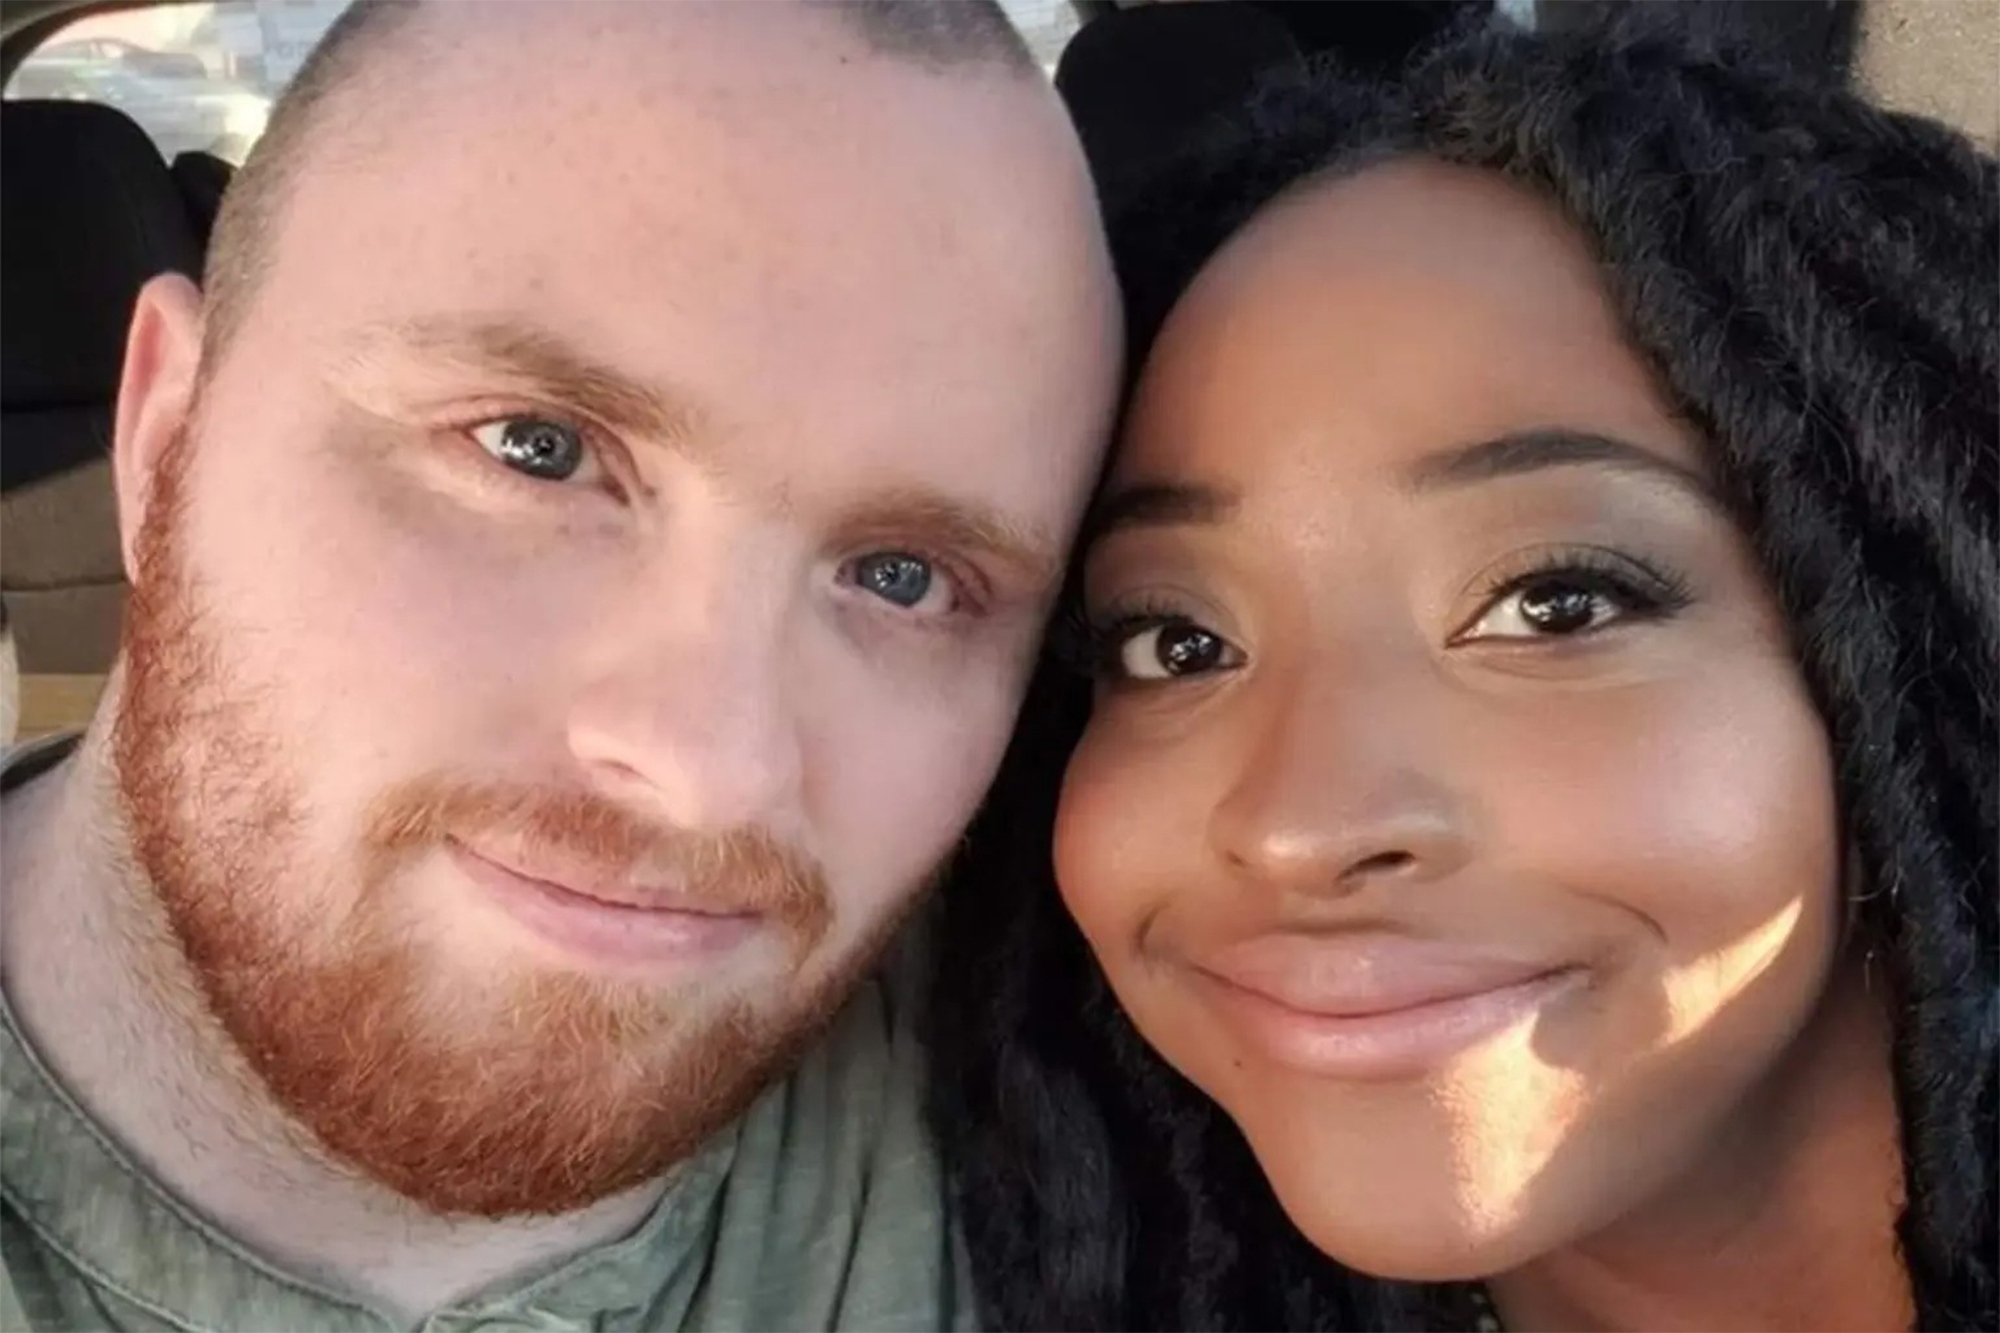 Texas Governor Greg Abbott issued a full pardon for Daniel Perry, a US Army sergeant convicted of shooting Black Lives Matter protester Garrett Foster in 2020.